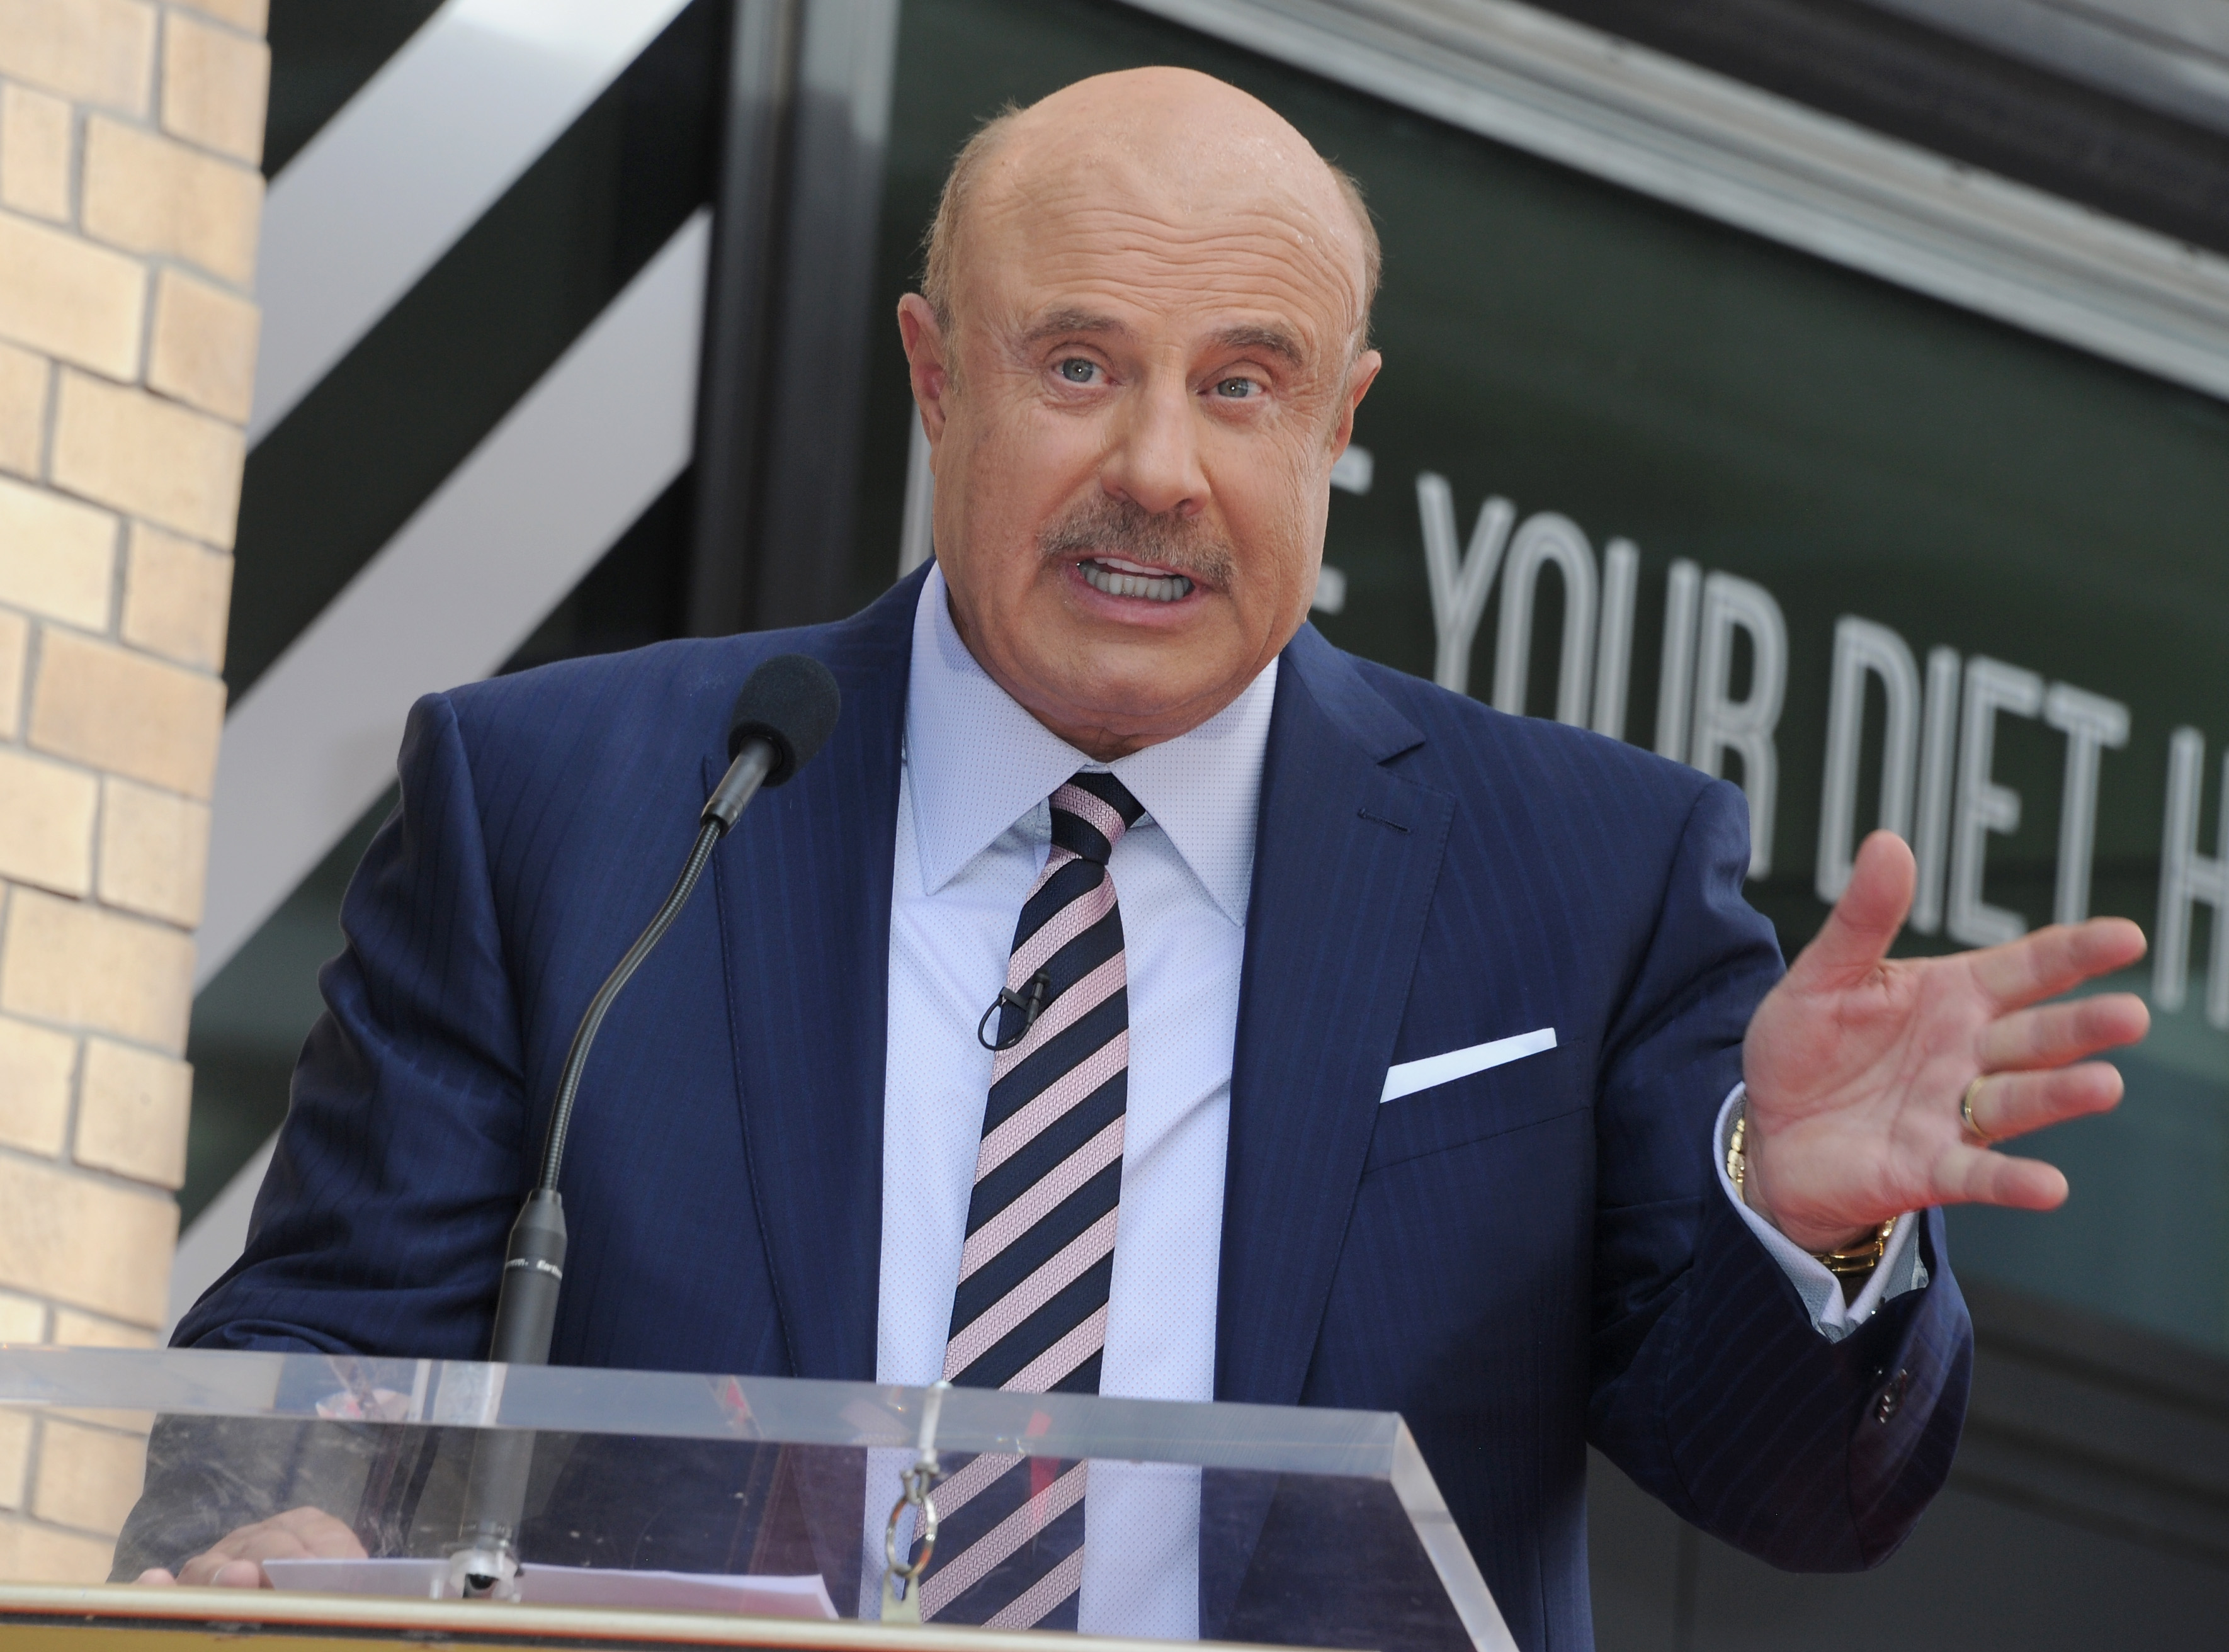 Dr. Phil pleads for people to stop calling him "daddy" on TikTok.